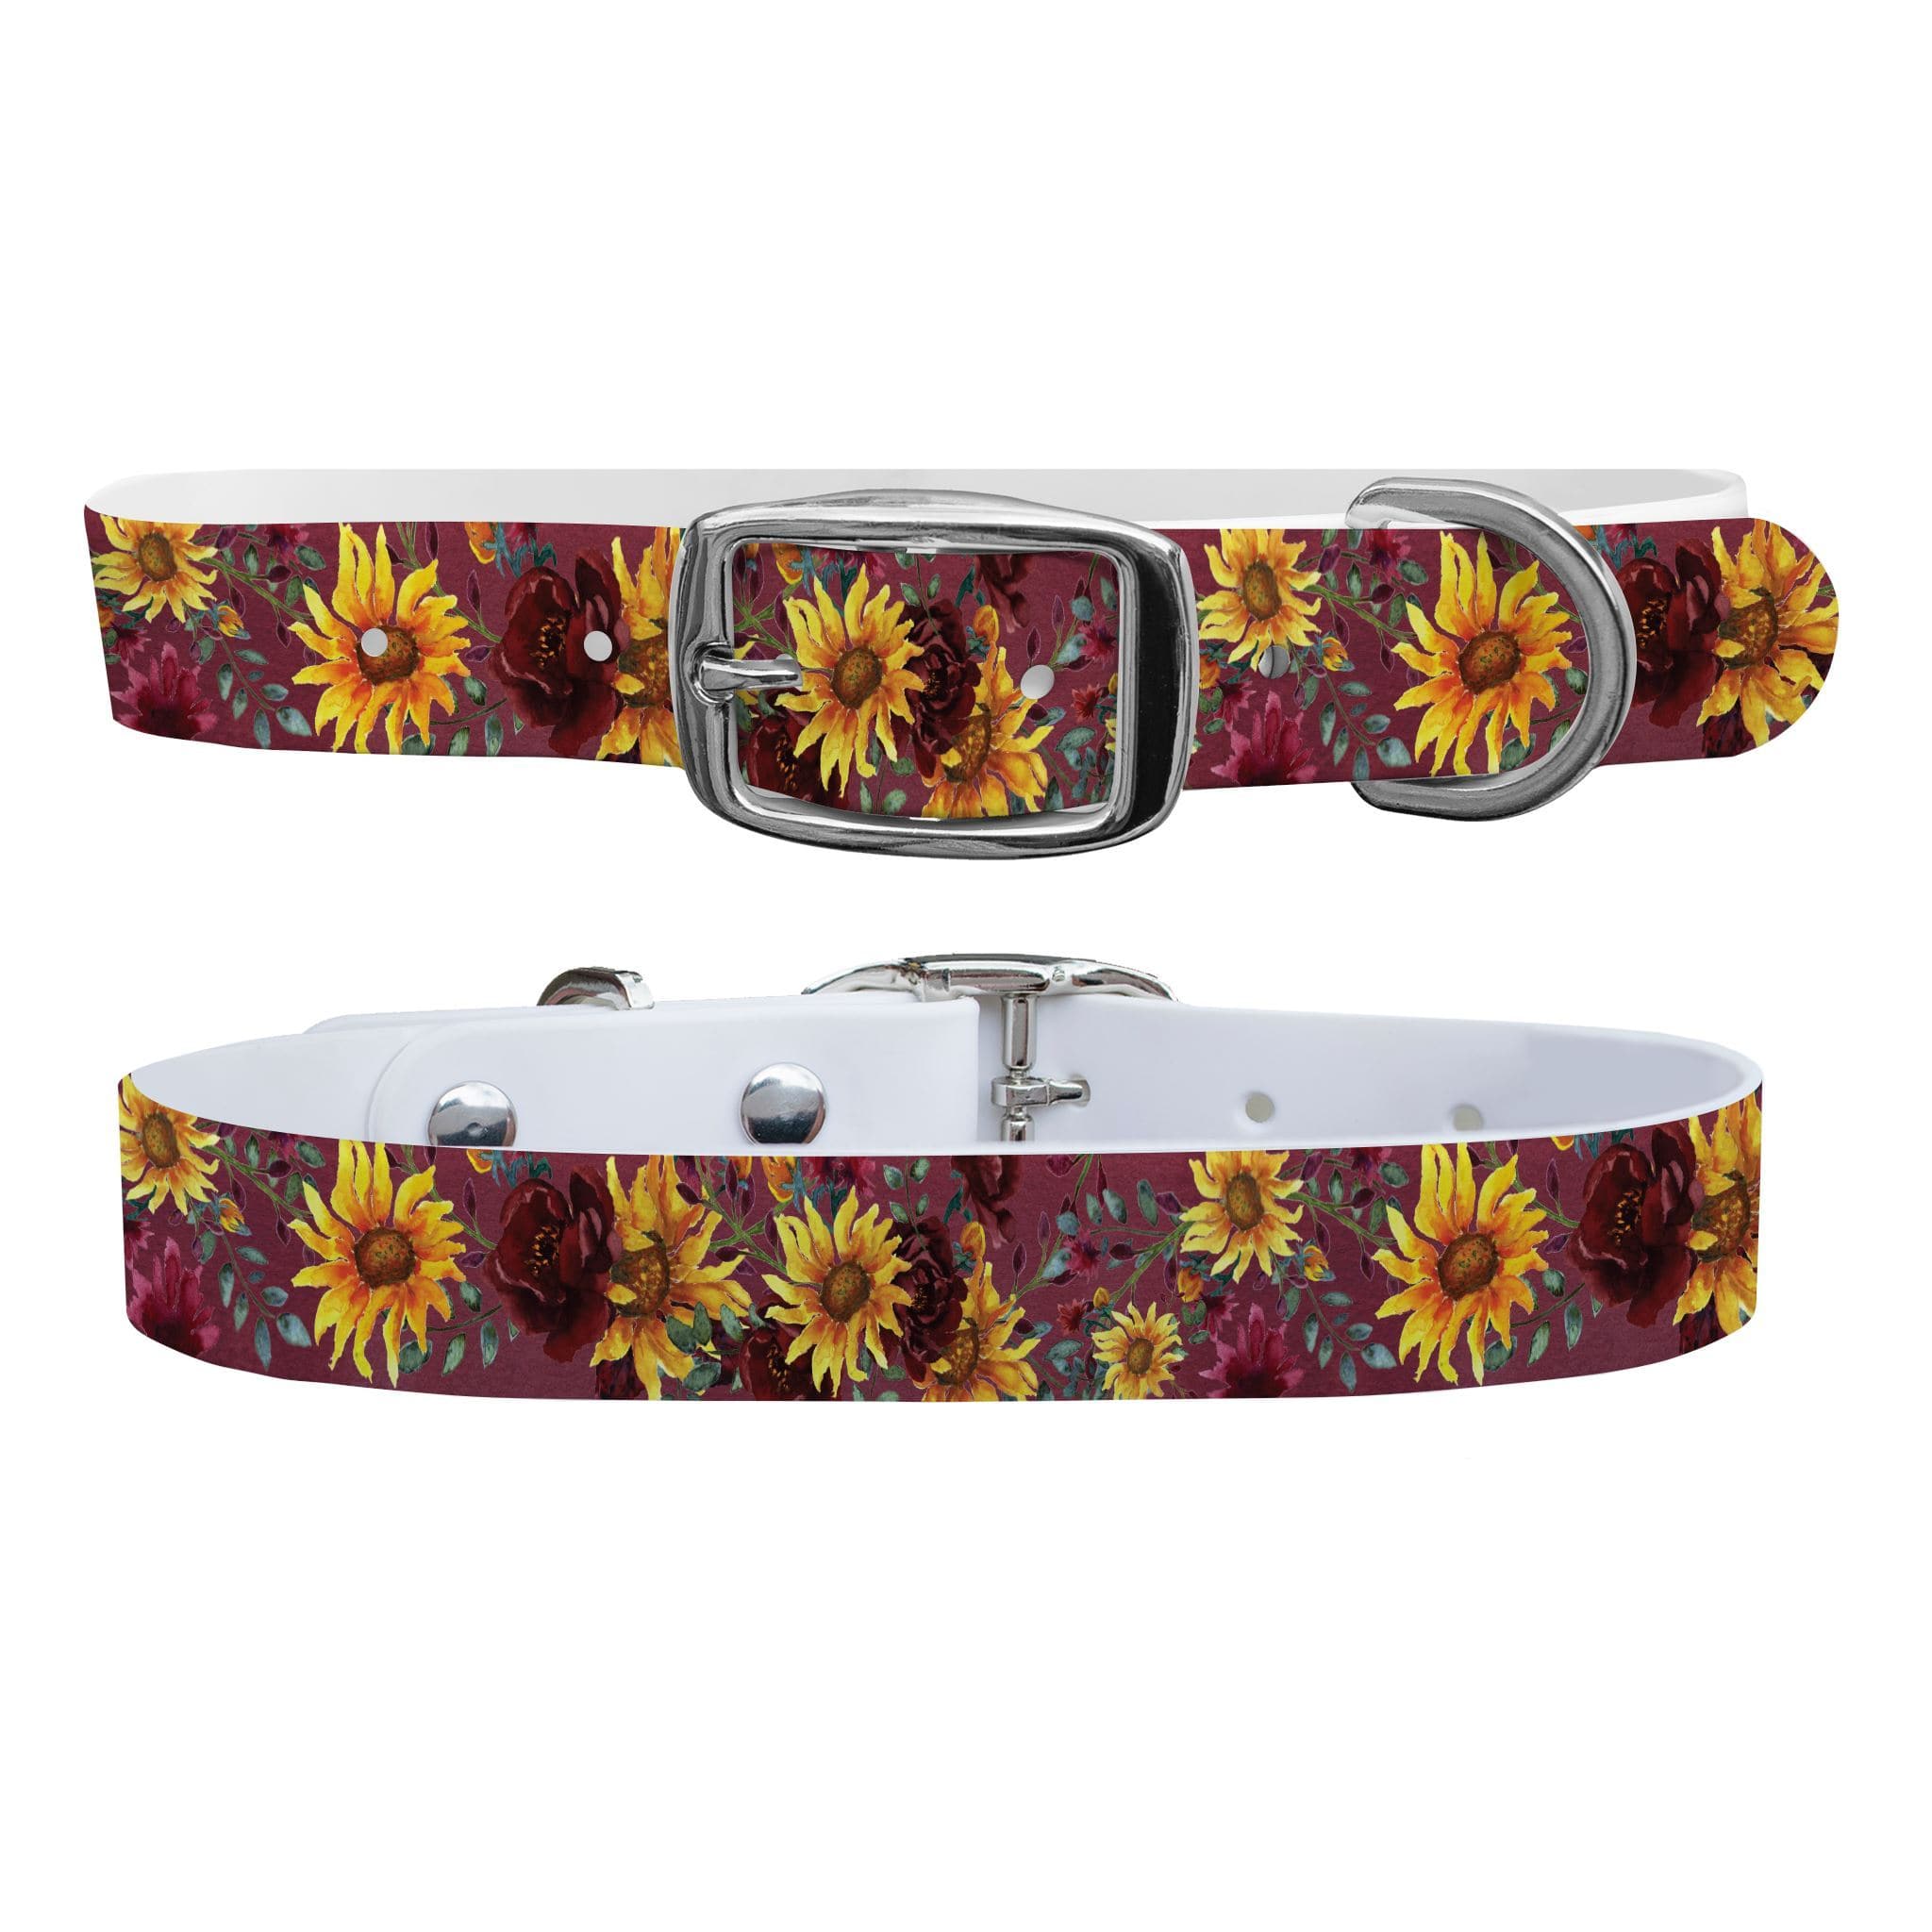 Merlot Sunflowers Dog Collar With Silver Buckle - Large